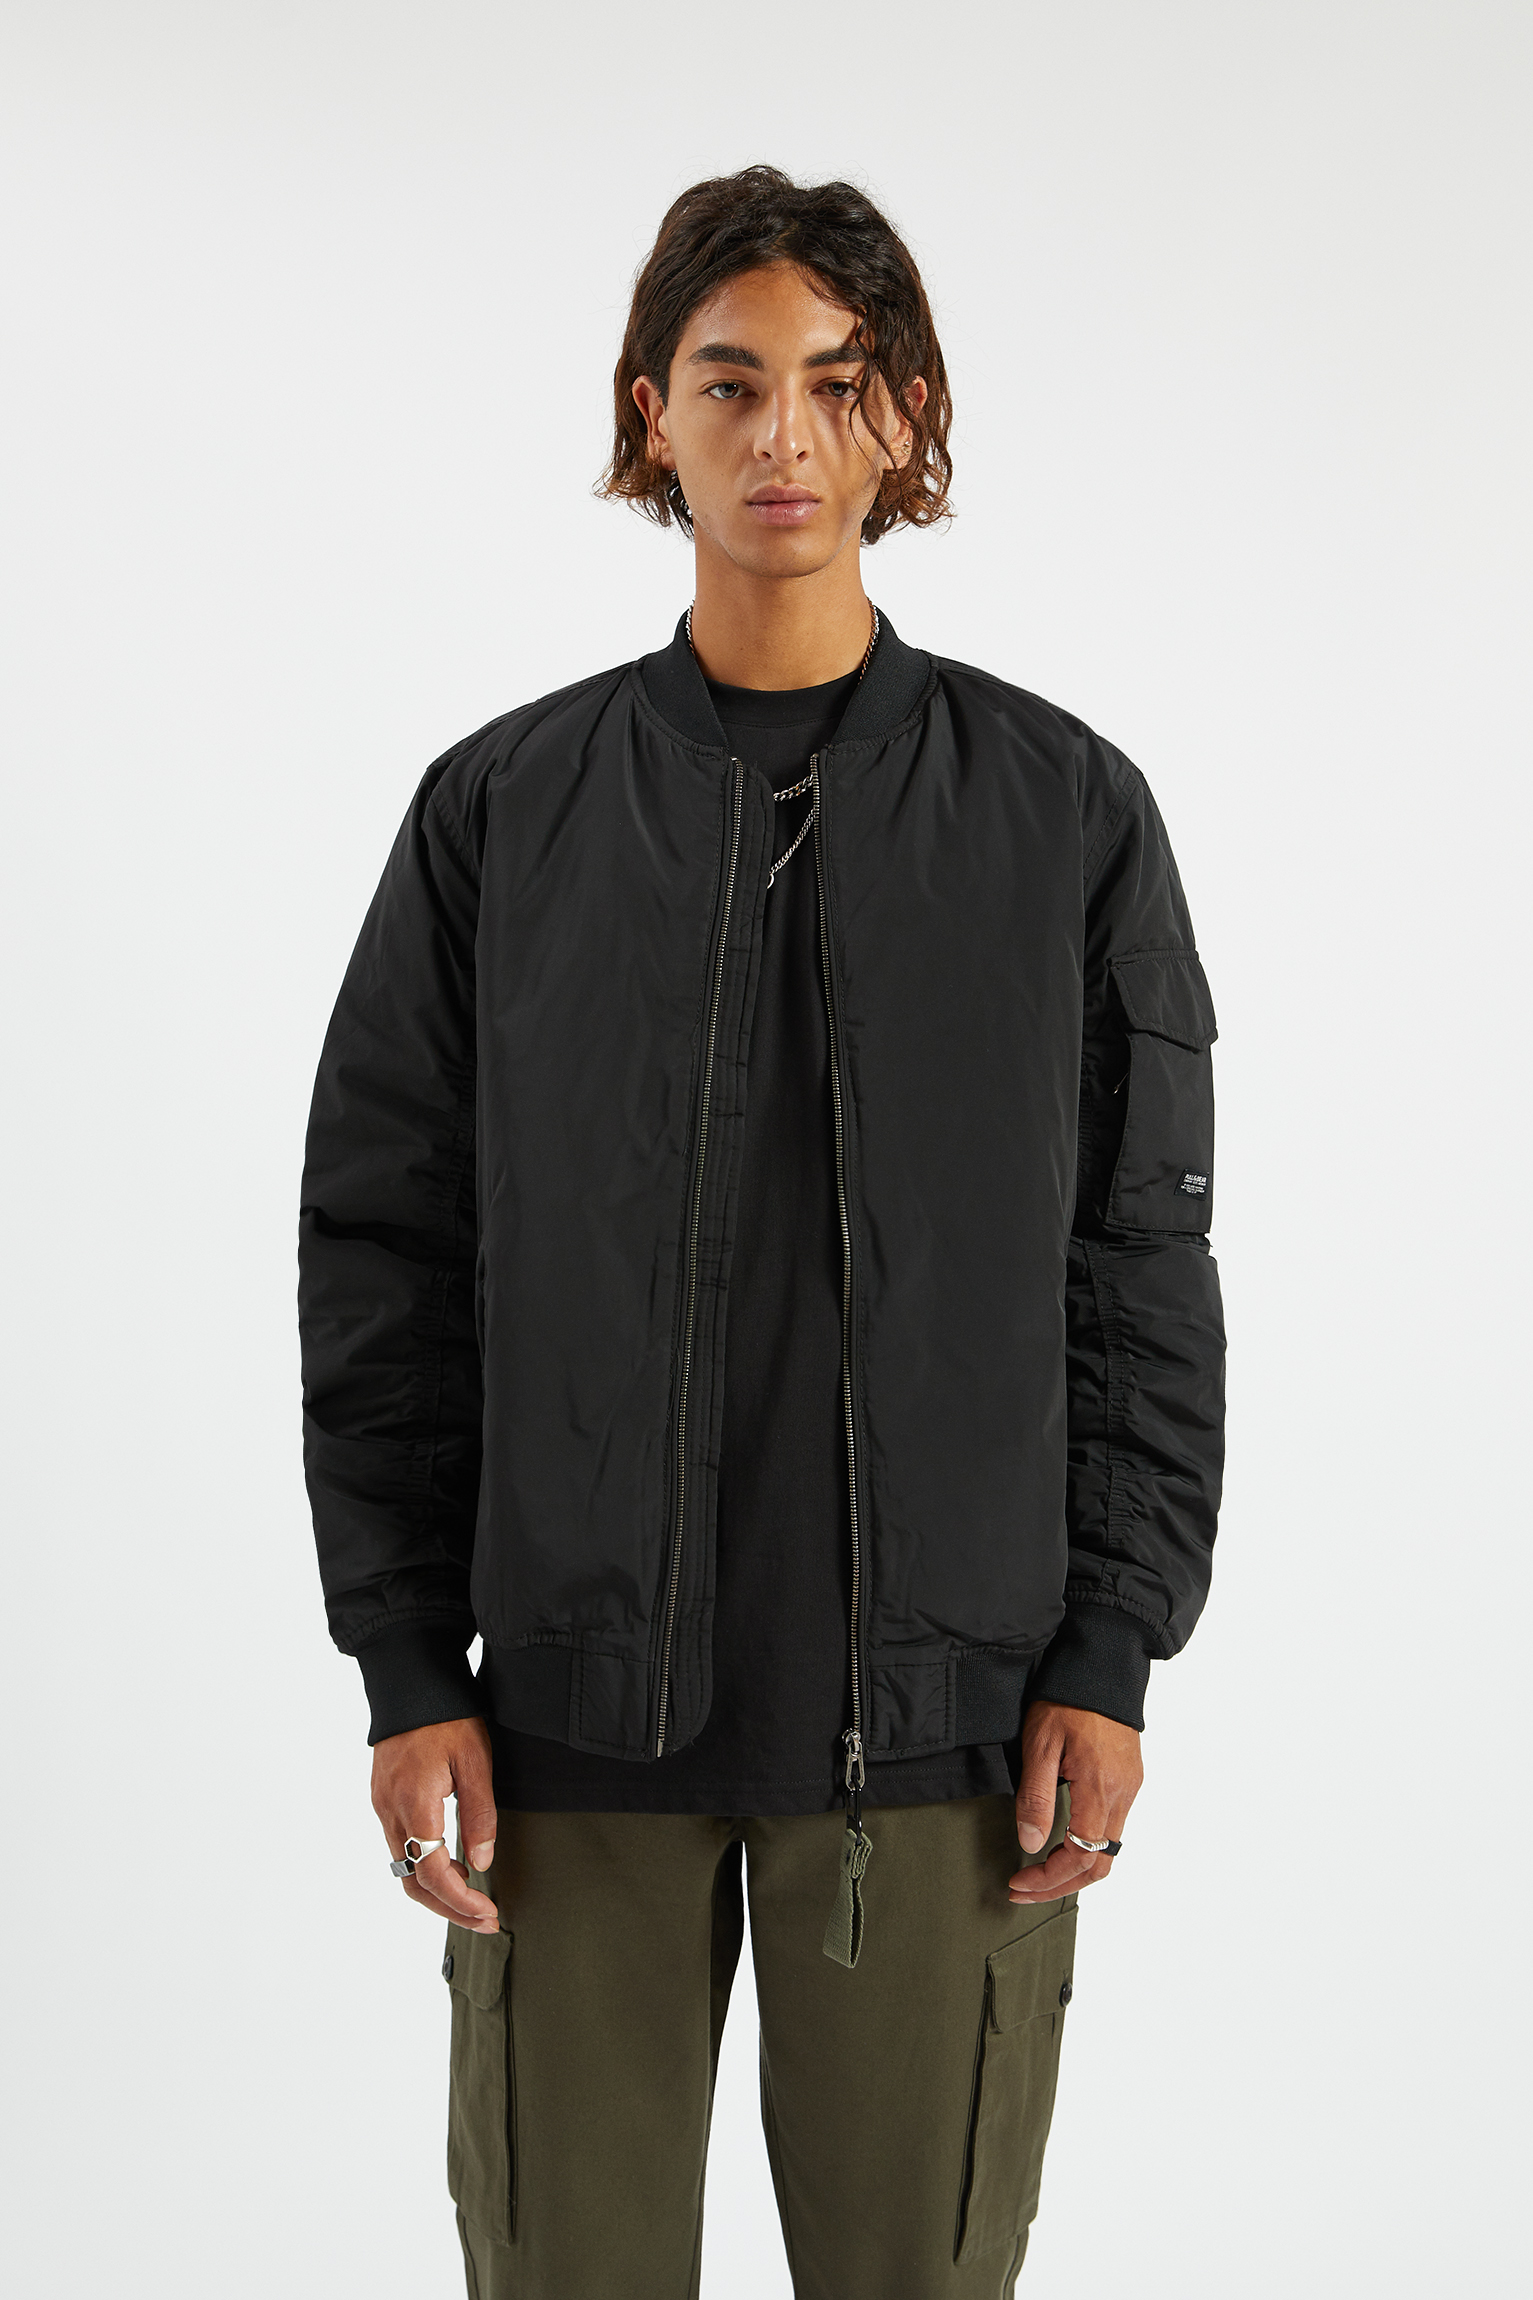 pull and bear bomber hombre